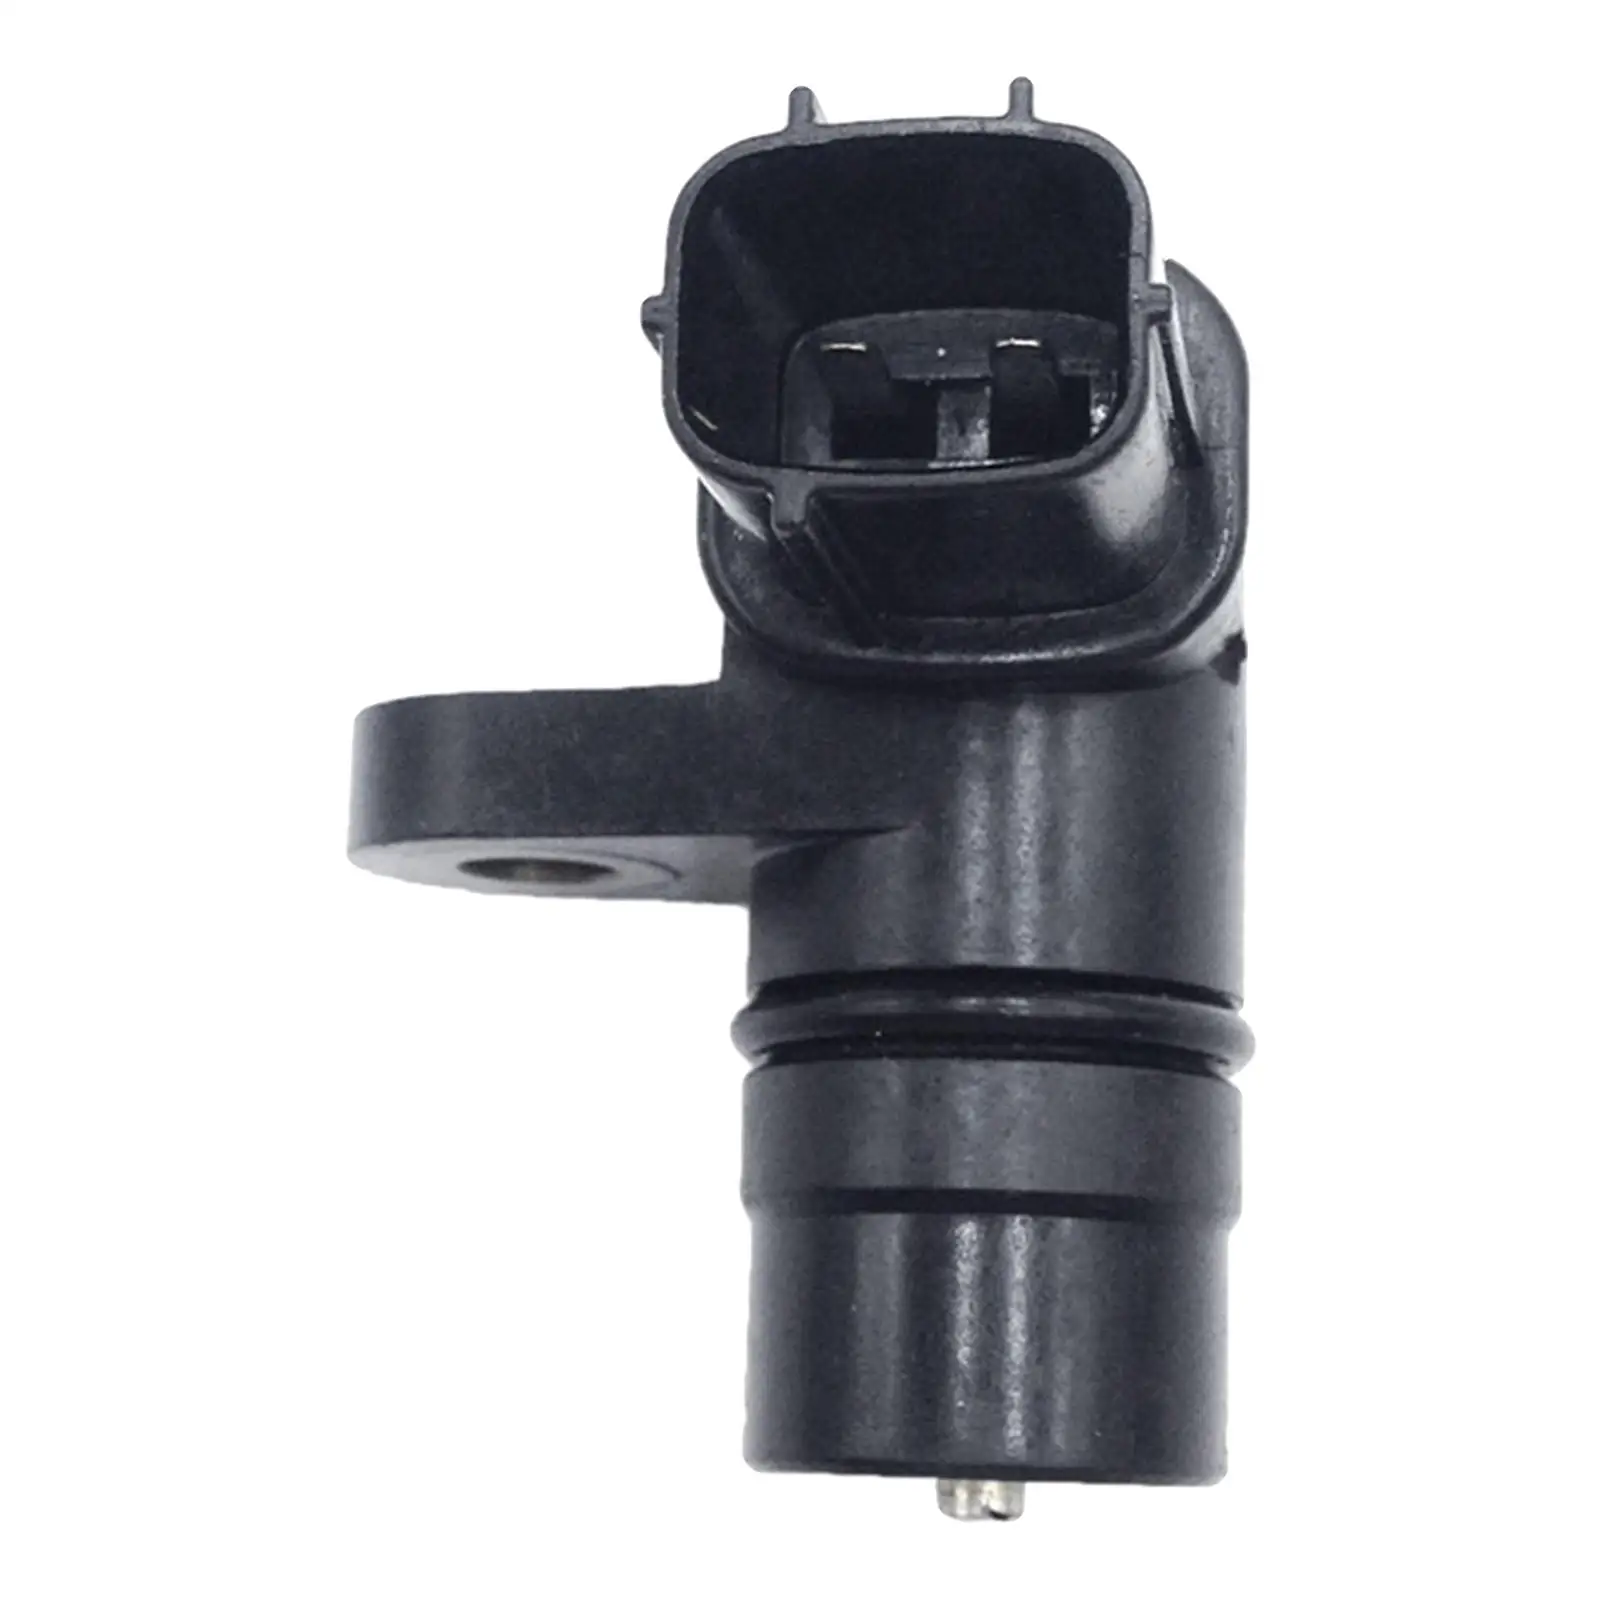 Transmission Speed Sensor 28810-P4V-003 Input Output Speed Sensor Replacement Parts Accessories for Honda Civic